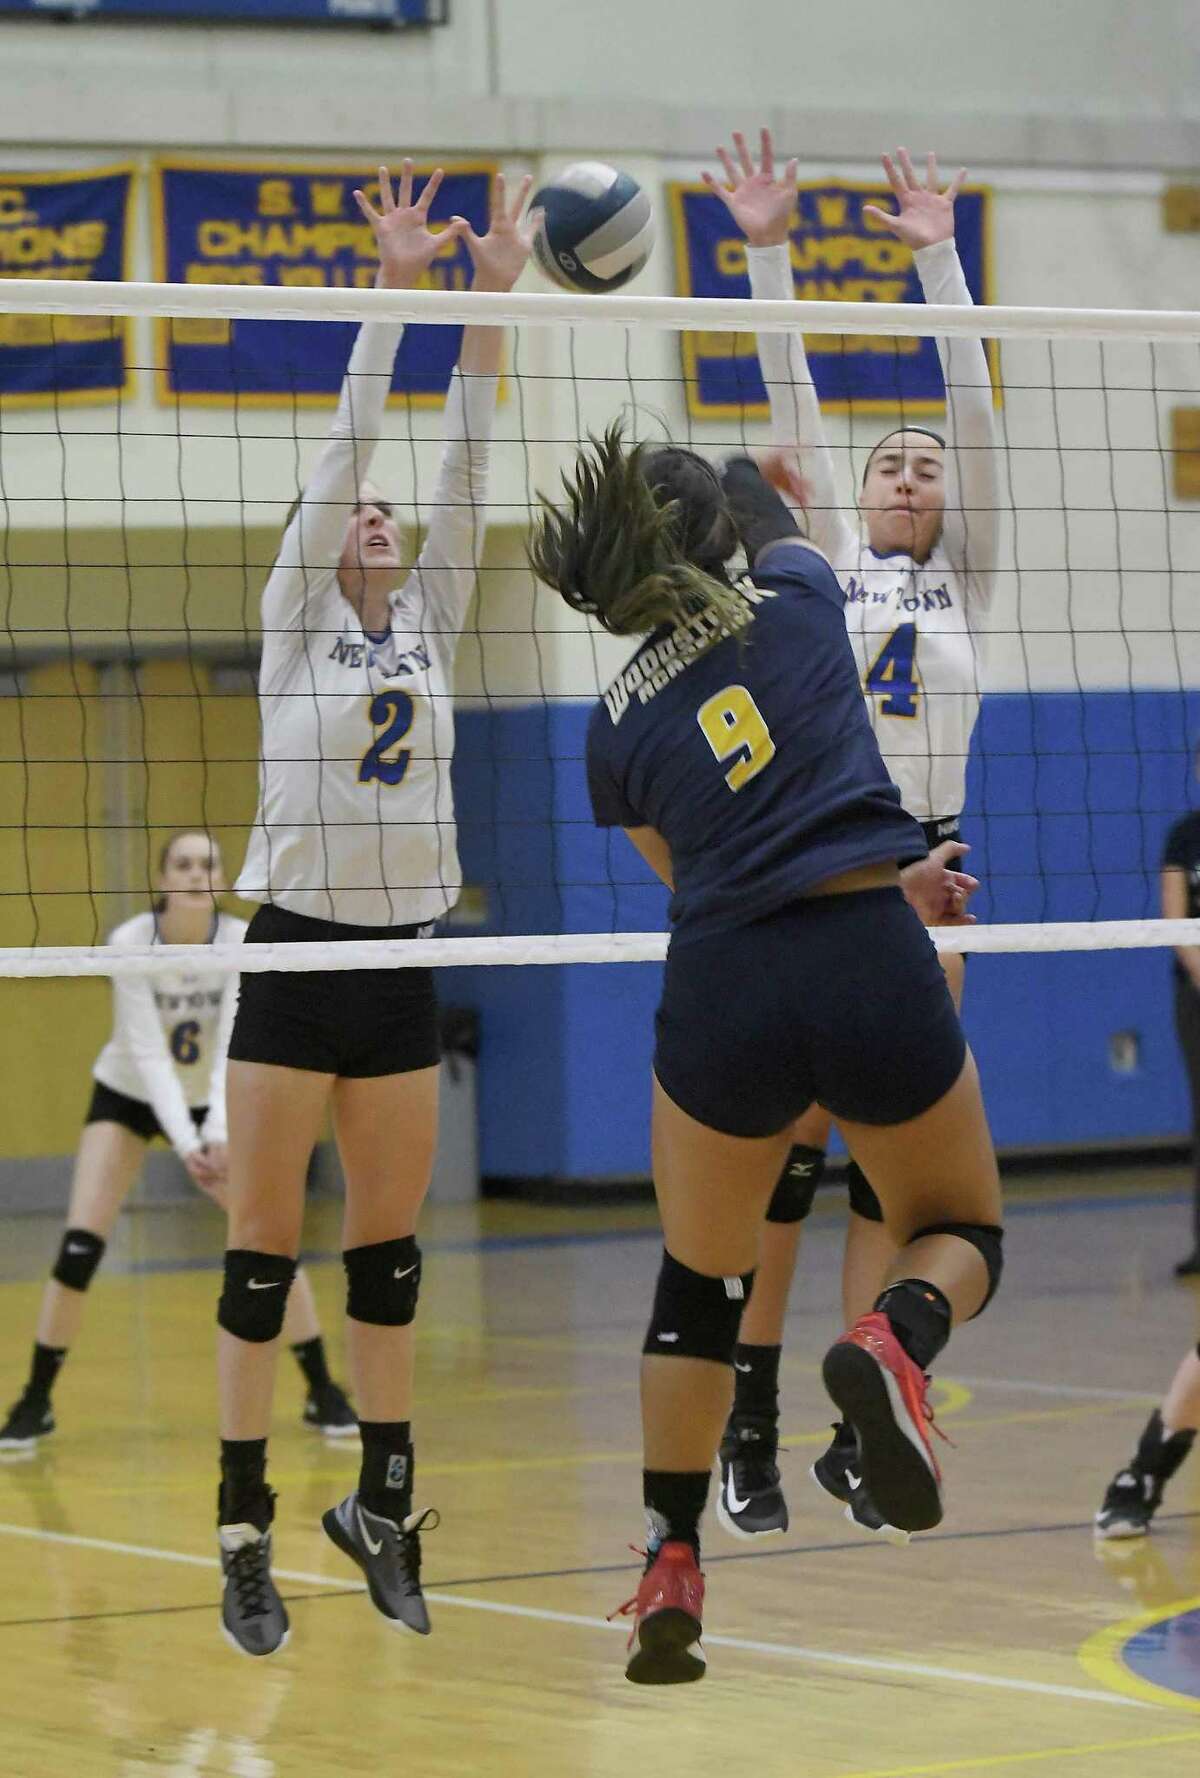 Woodstock Academy?’s Paula Hernandez (9) spikes the ball past Newtown?’s Hannah Groonell, left, and Veronica Kroha (4) during the Woodstock Academy at Newtown High School girls volleyball game, Sept. 17, 2018.